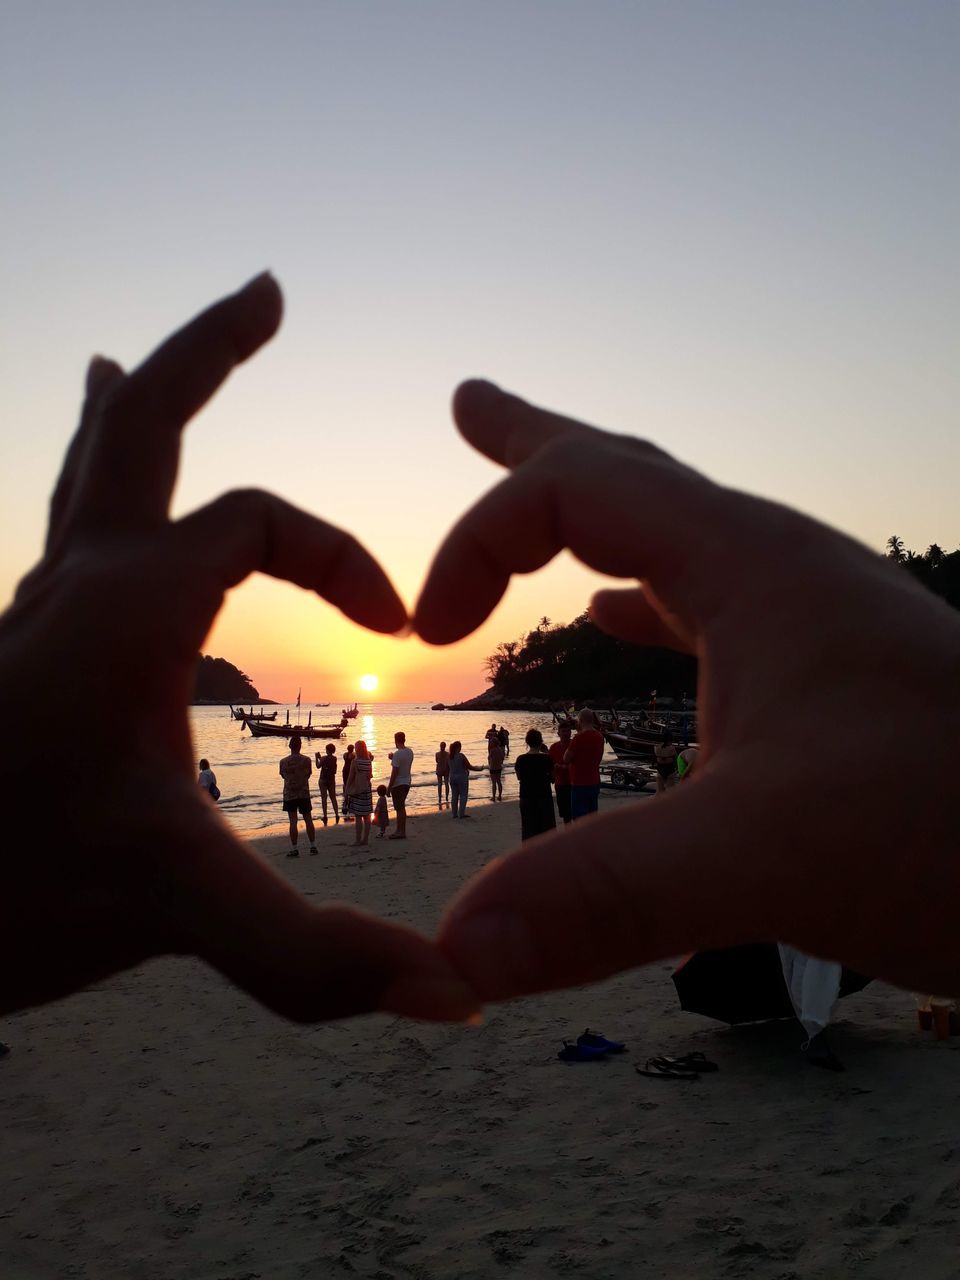 hand, sky, beach, nature, sunset, adult, land, silhouette, togetherness, leisure activity, positive emotion, group of people, women, sand, love, emotion, lifestyles, holiday, men, friendship, vacation, trip, outdoors, clear sky, light, water, sea, bonding, person, celebration, sunlight, enjoyment, crowd